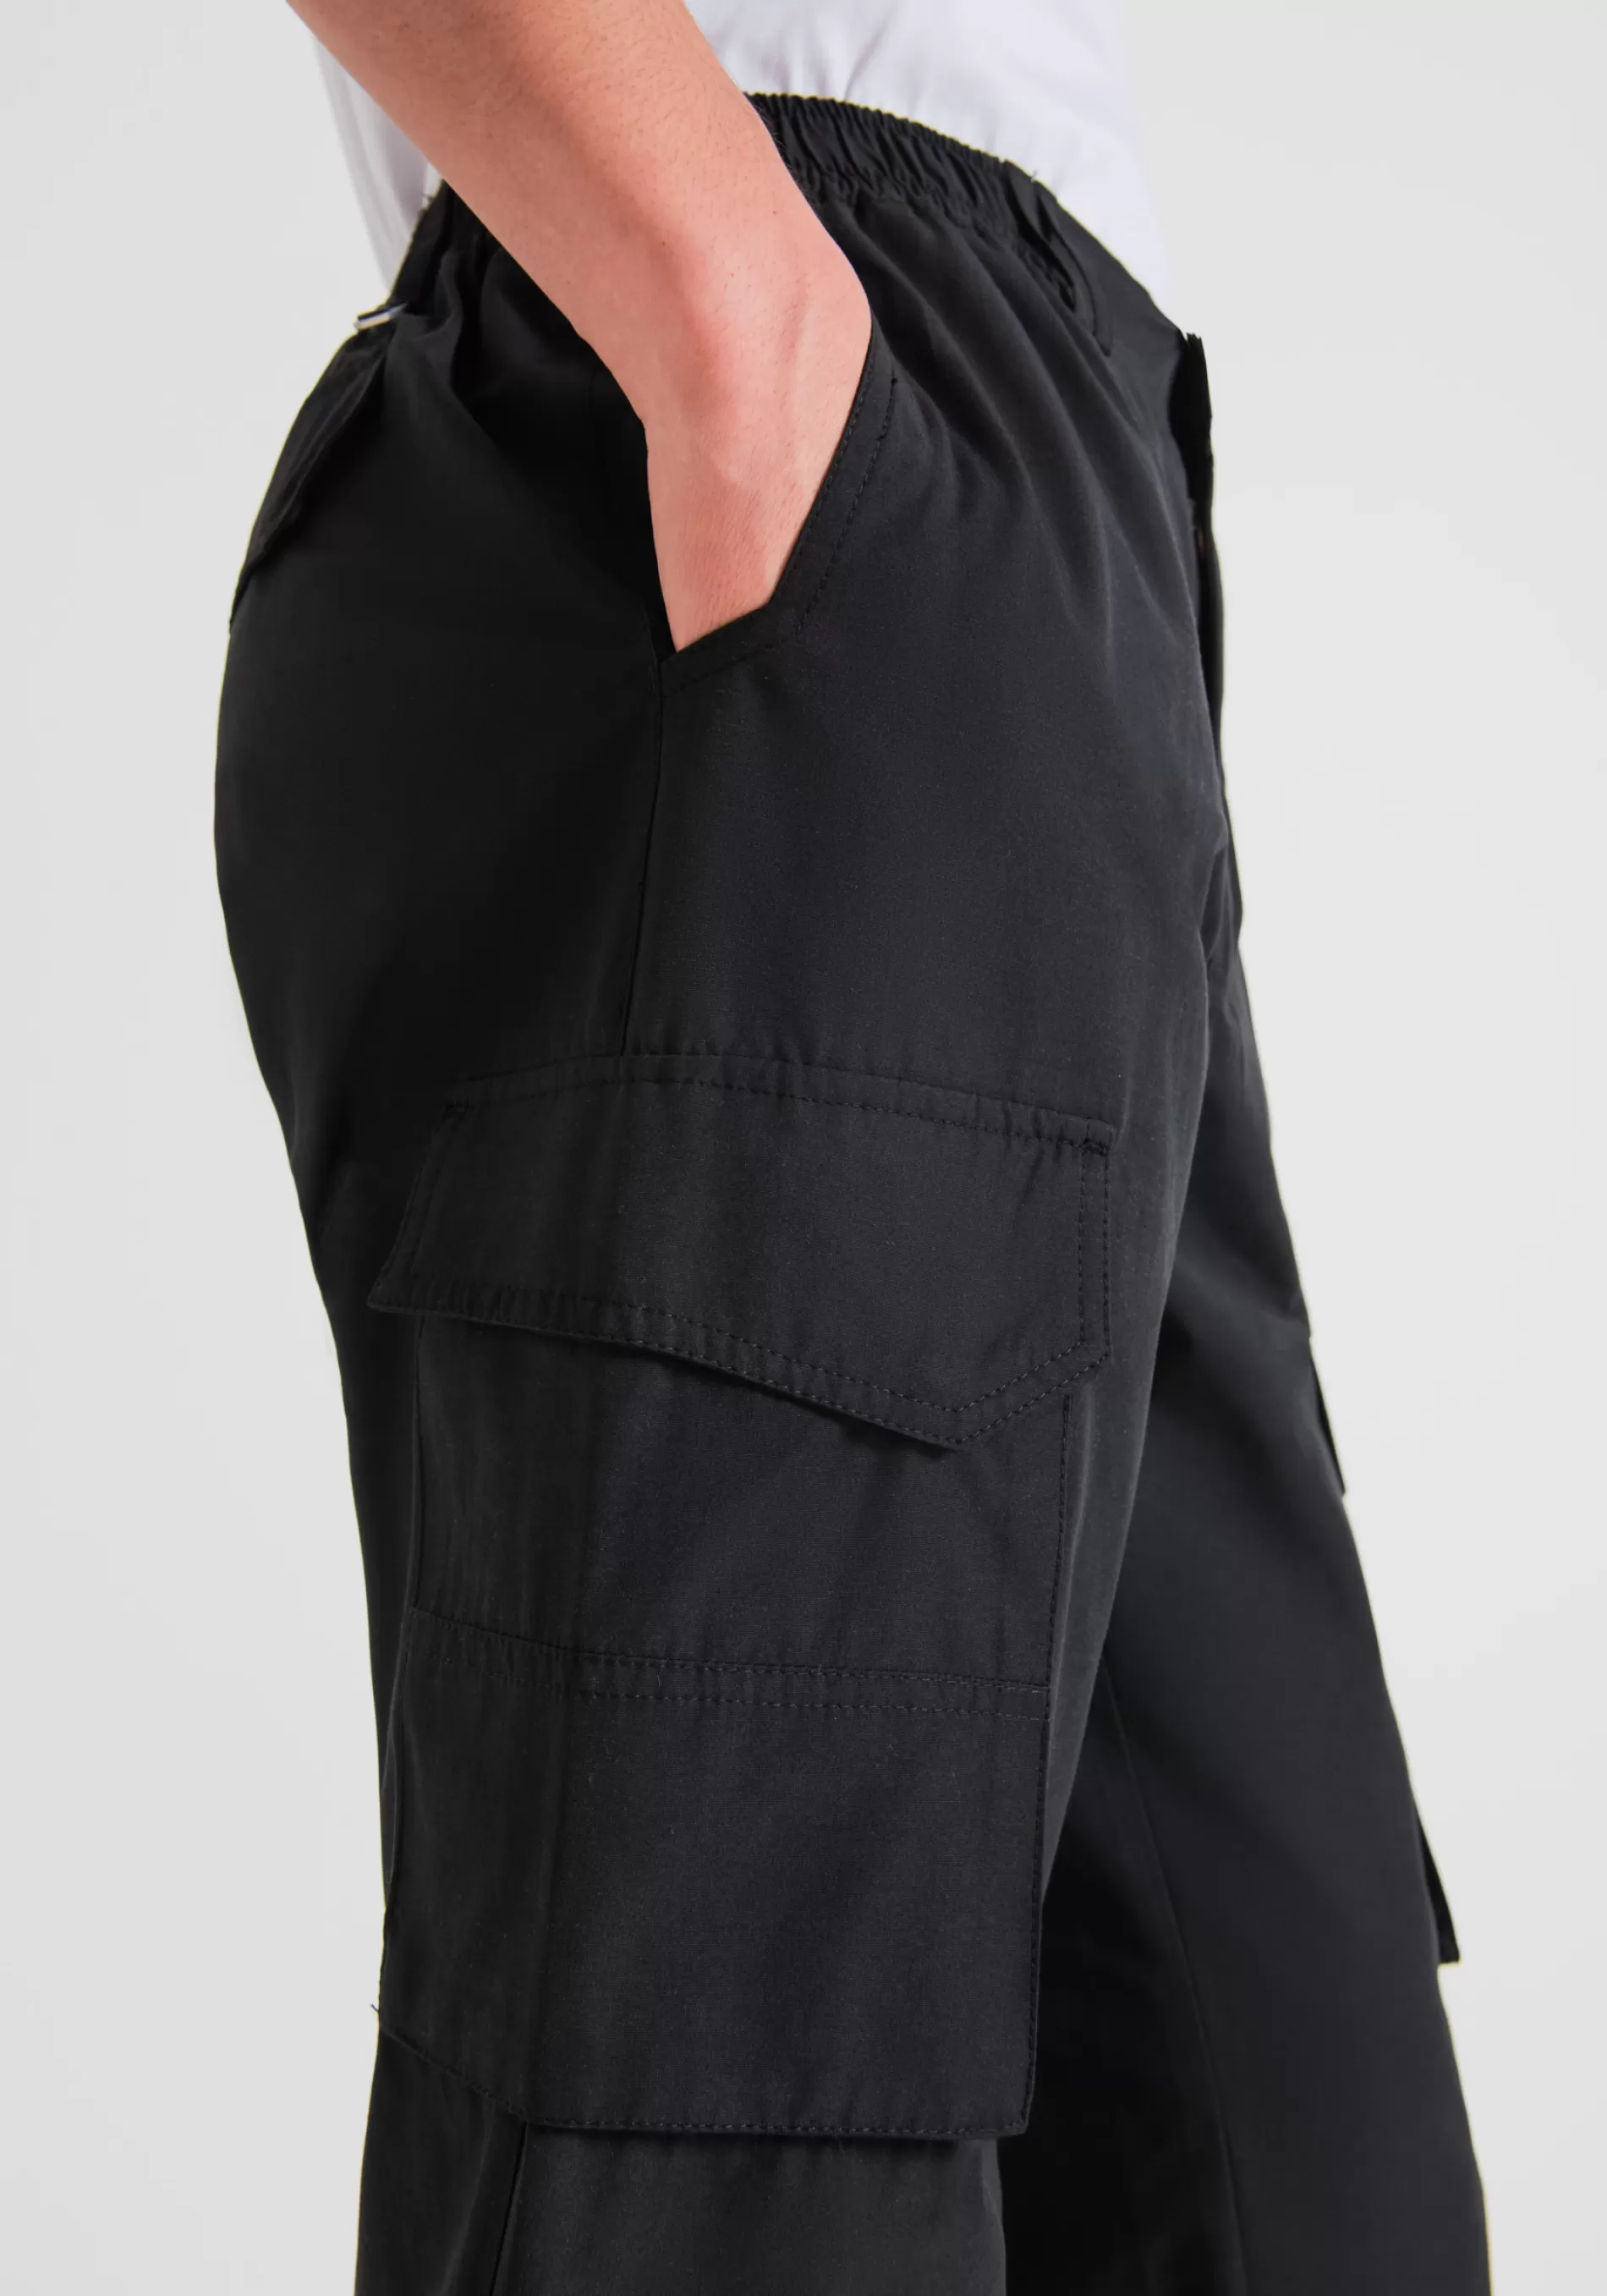 Store REGULAR FIT CARGO TROUSERS IN COTTON BLEND WITH ELASTICATED WAISTBAND AND VELCRO CLOSURE AT THE BOTTOM Trousers